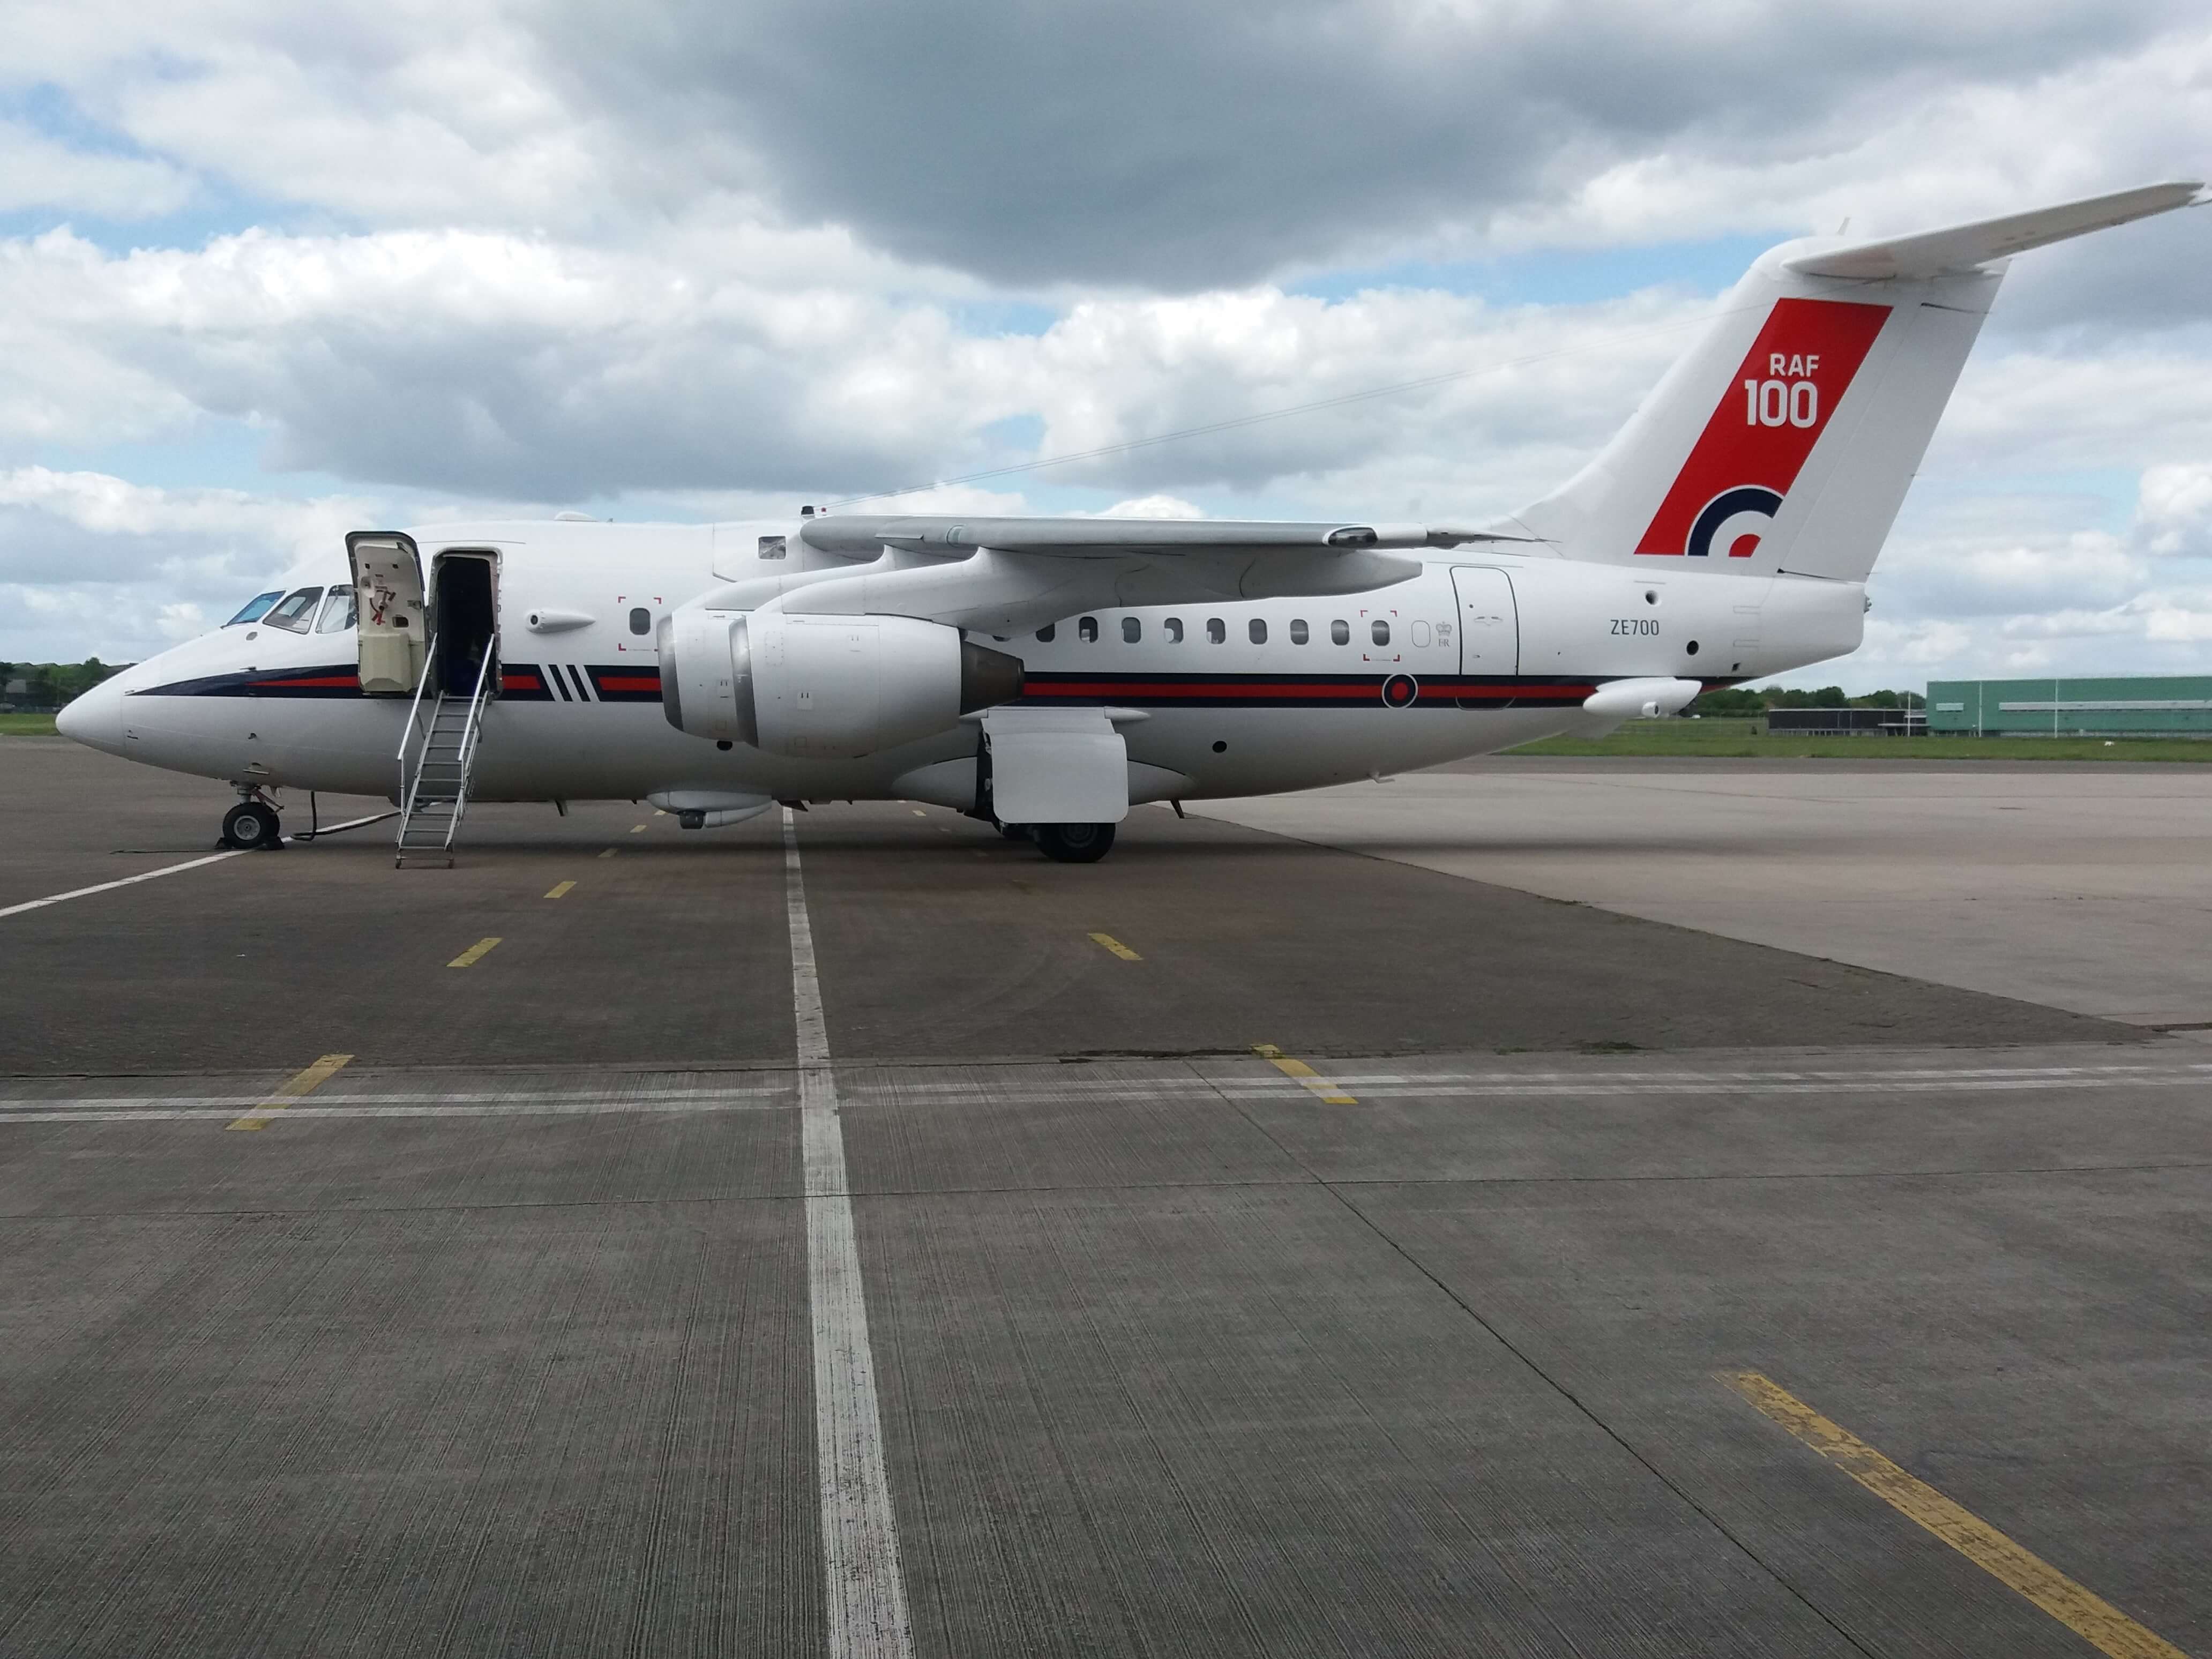 BAE Systems wins £42 million UK Ministry Of Defence support contract for BAe 146 fleet